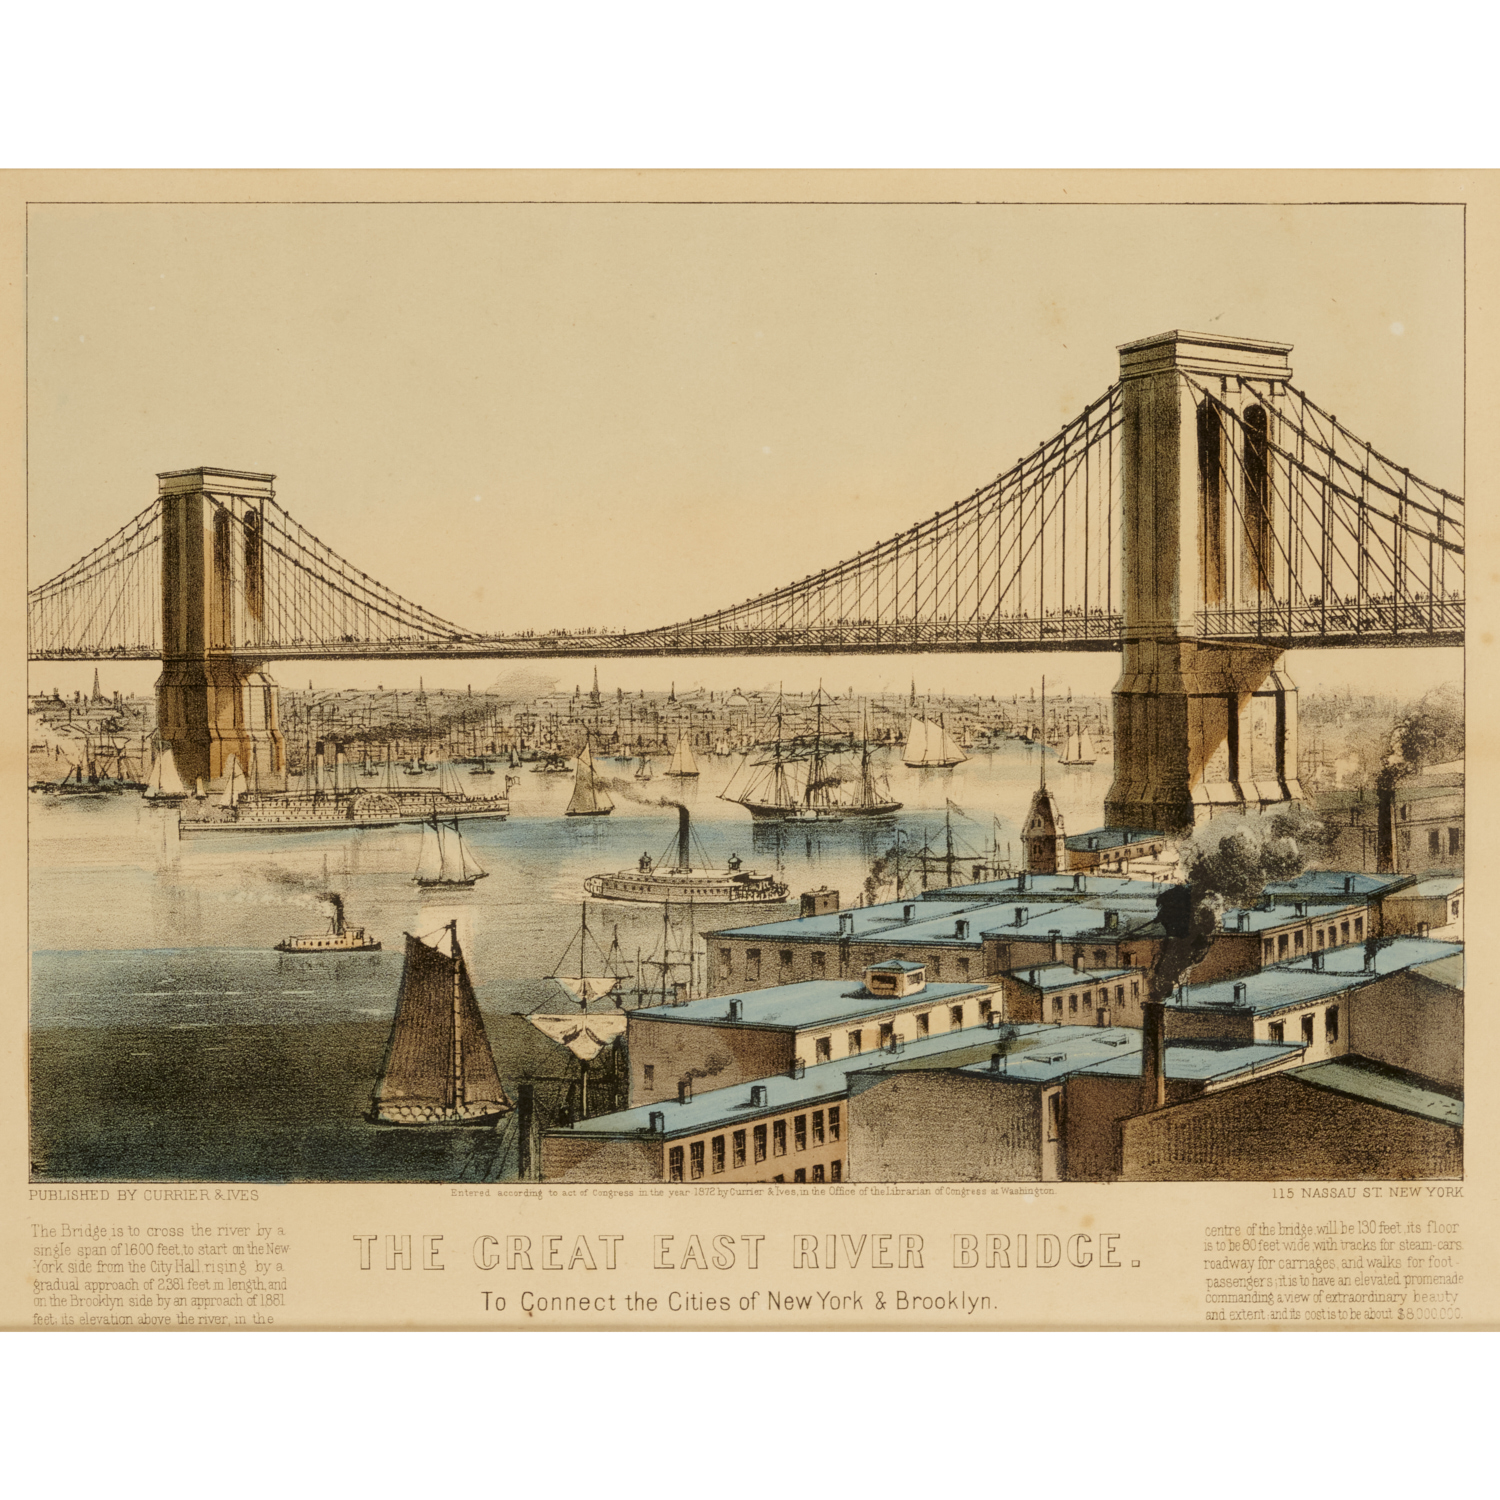 CURRIER & IVES, HAND-COLORED LITHOGRAPH,